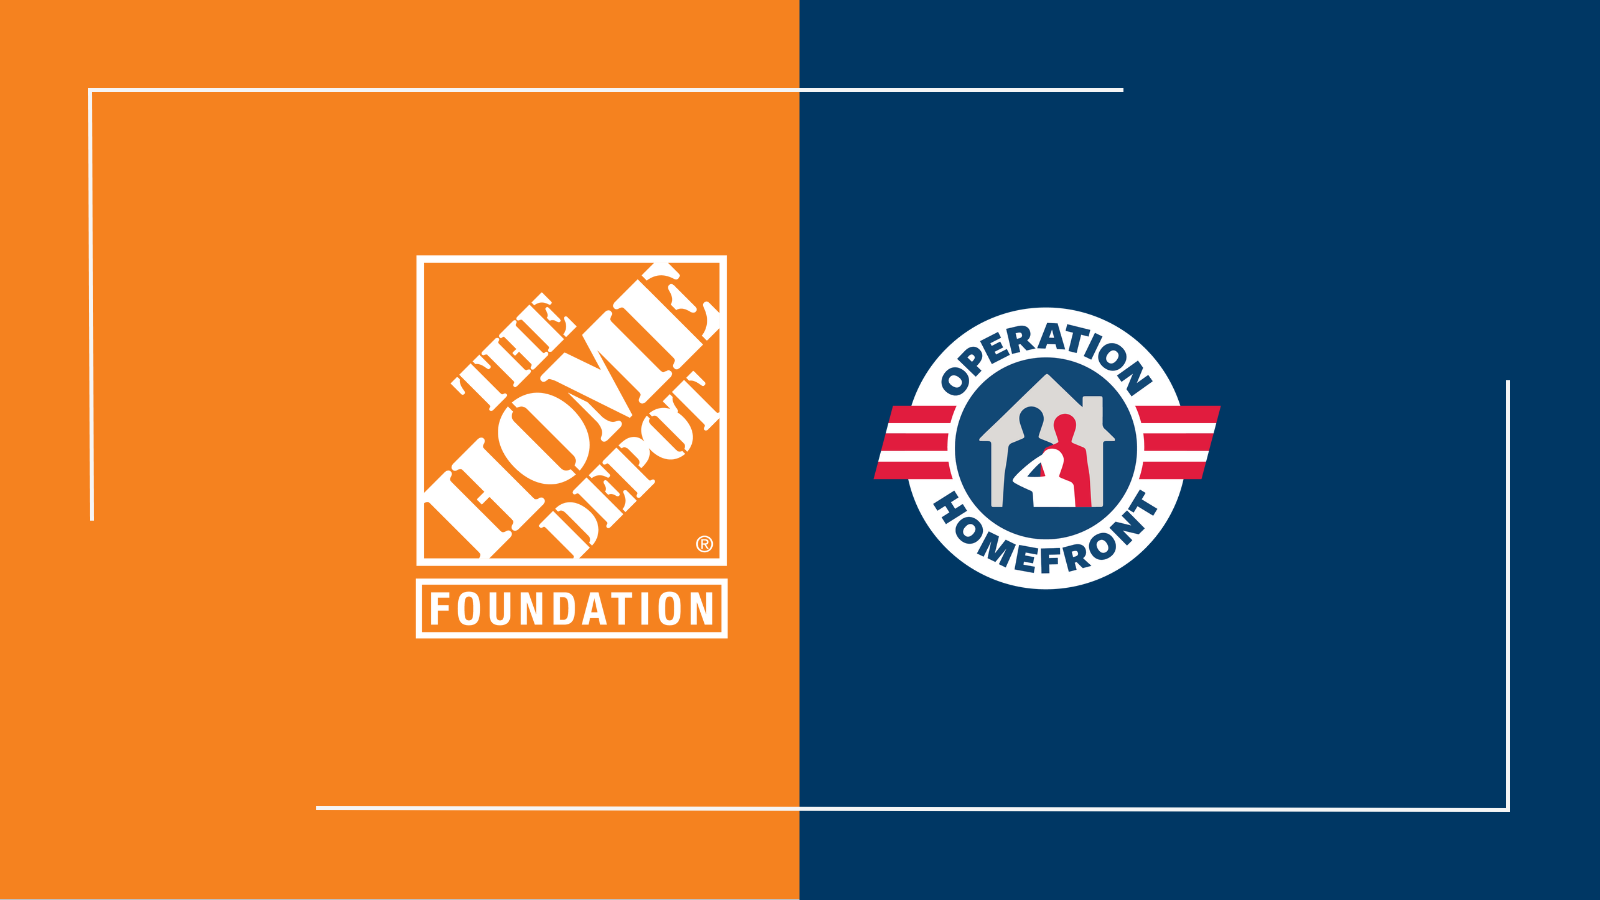 The home depot foundation and operation homefront logos